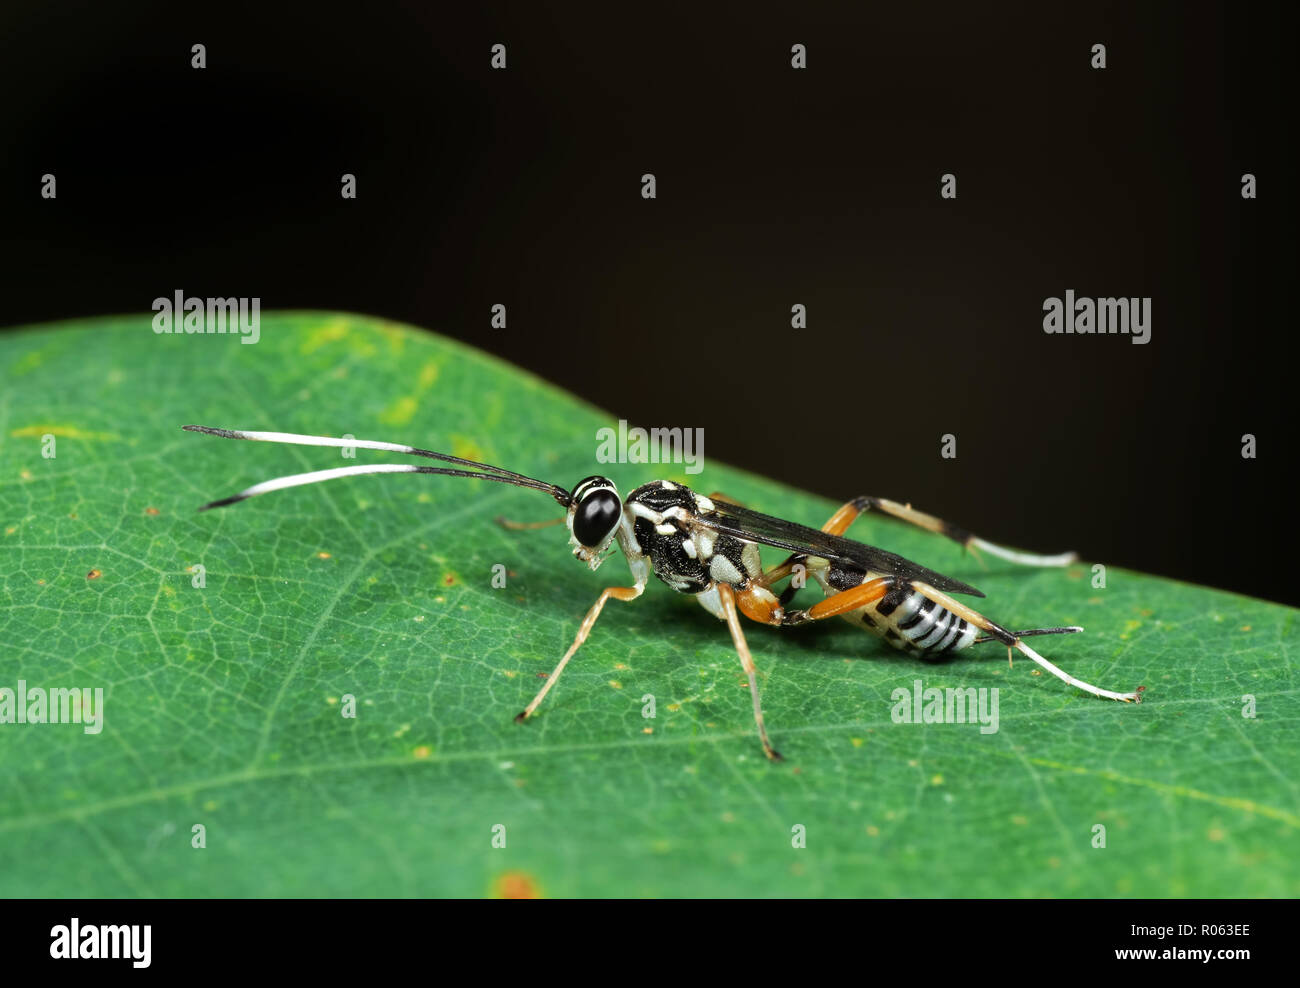 Macro Photography of Ichneumon Wasp with Black and White Antennae on Green Leaf Stock Photo